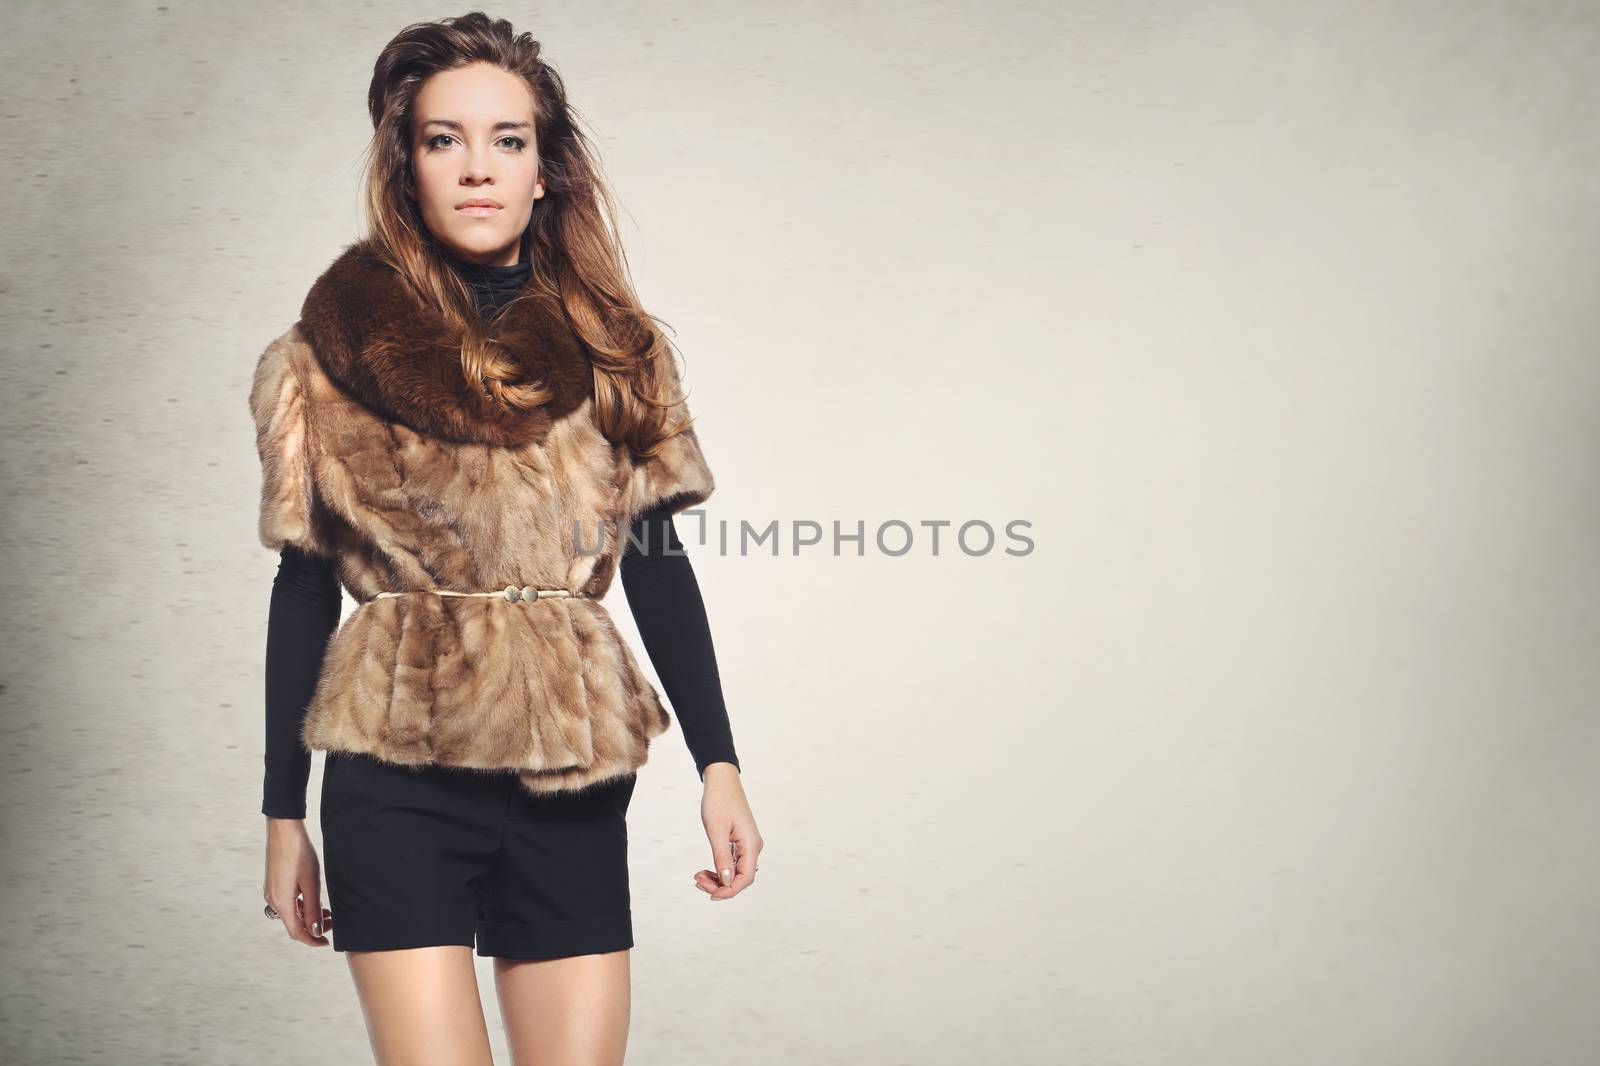 Mysterious elegant woman in a fur coat and sunglasses by robert_przybysz